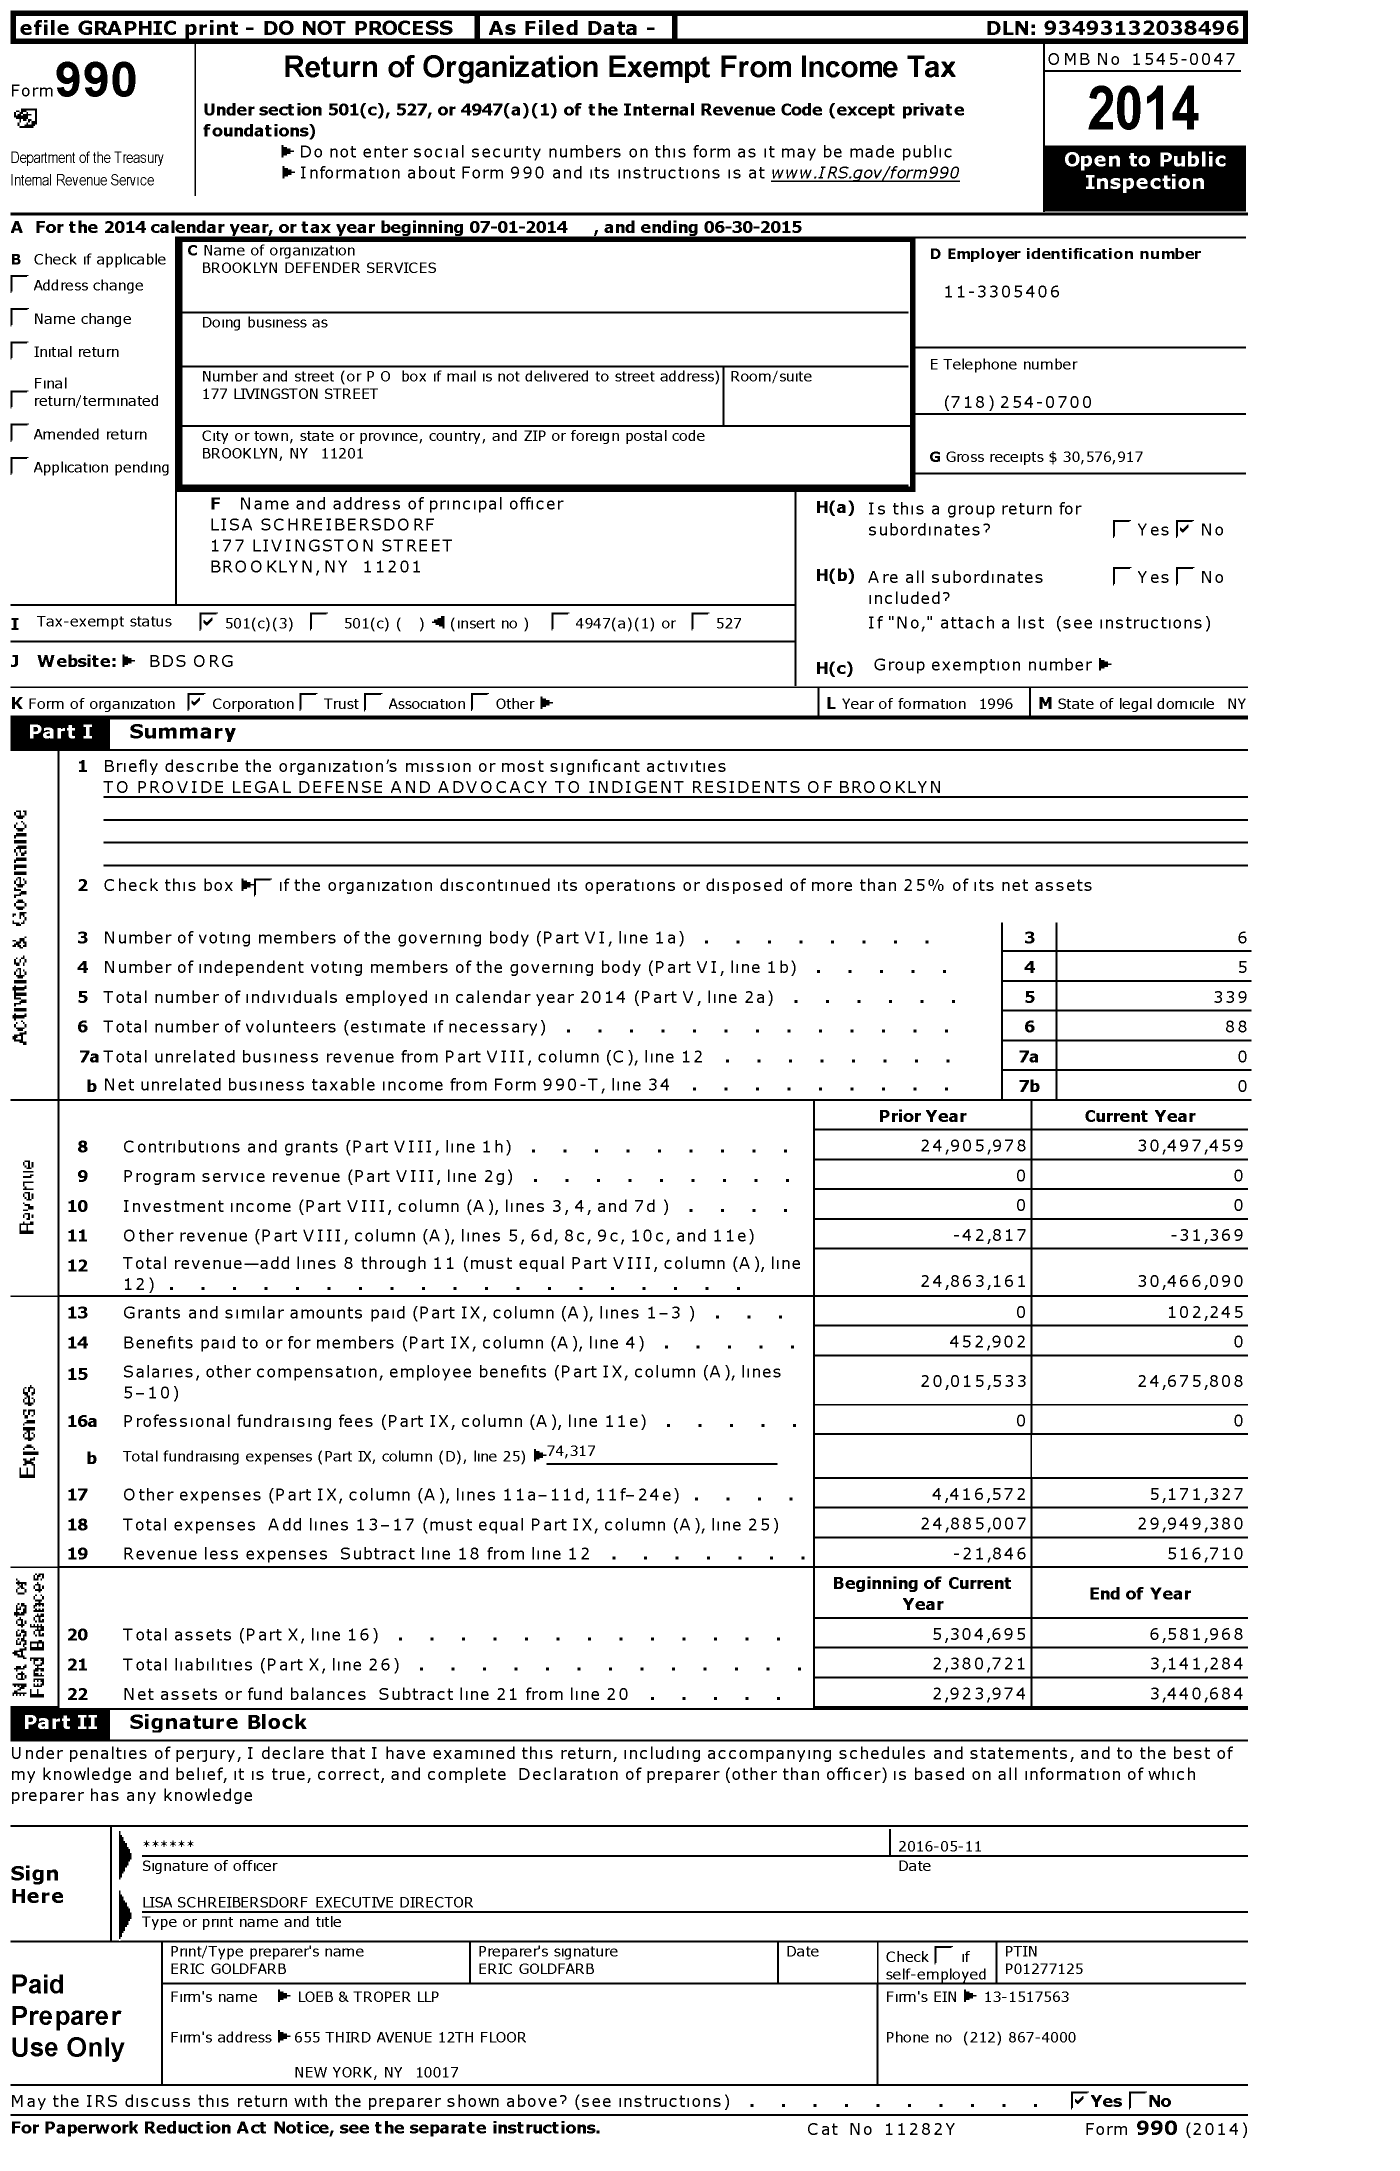 Image of first page of 2014 Form 990 for Brooklyn Defender Services (BDS)